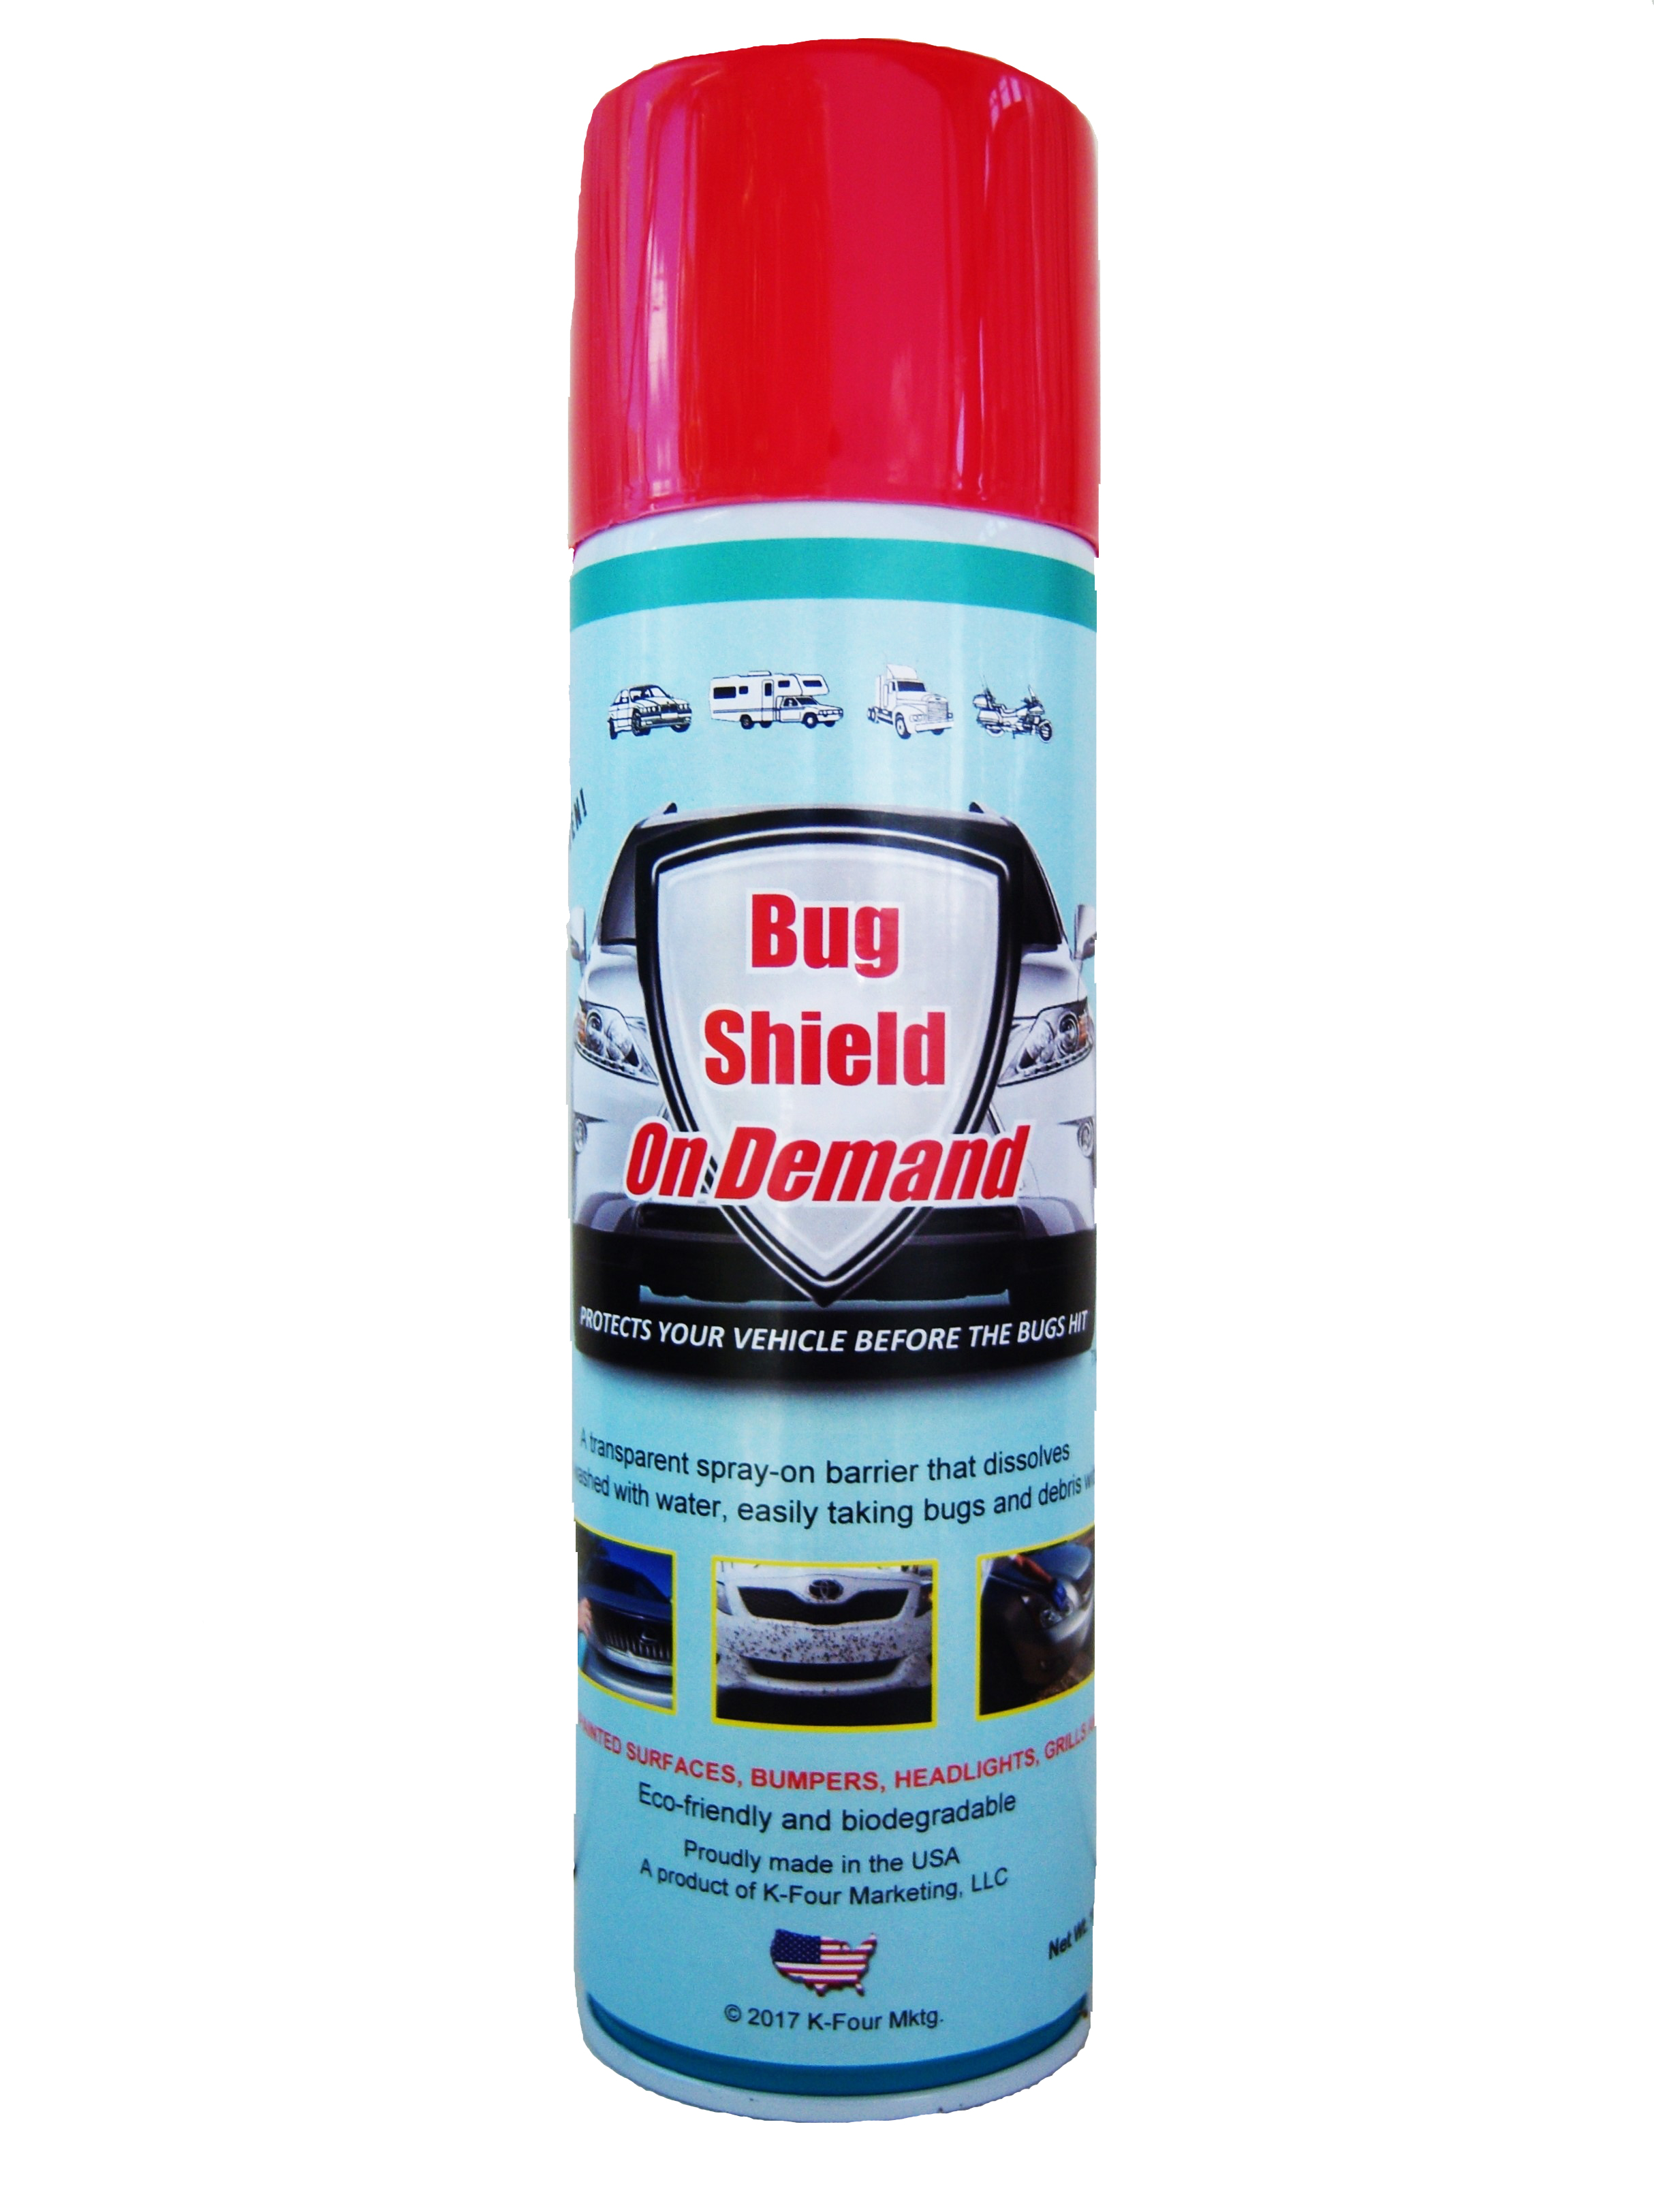 Bug Shield on Demand™ is available worldwide